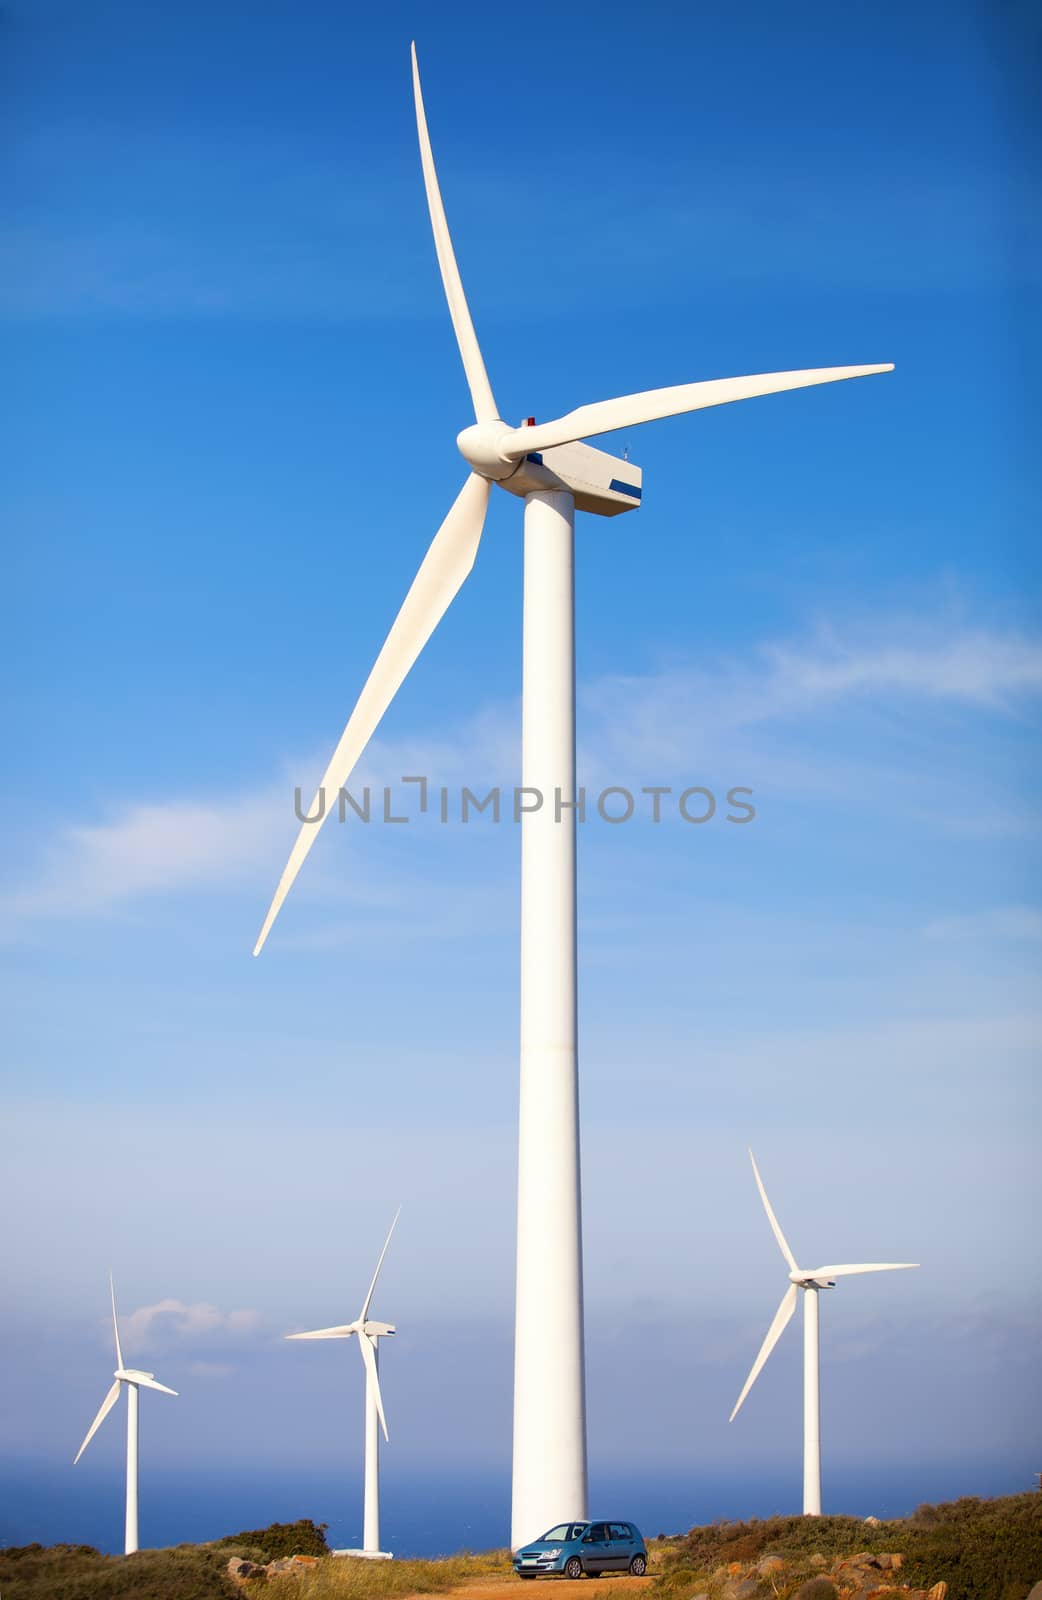 Wind turbines, the fastest-growing source of electricity production in the world